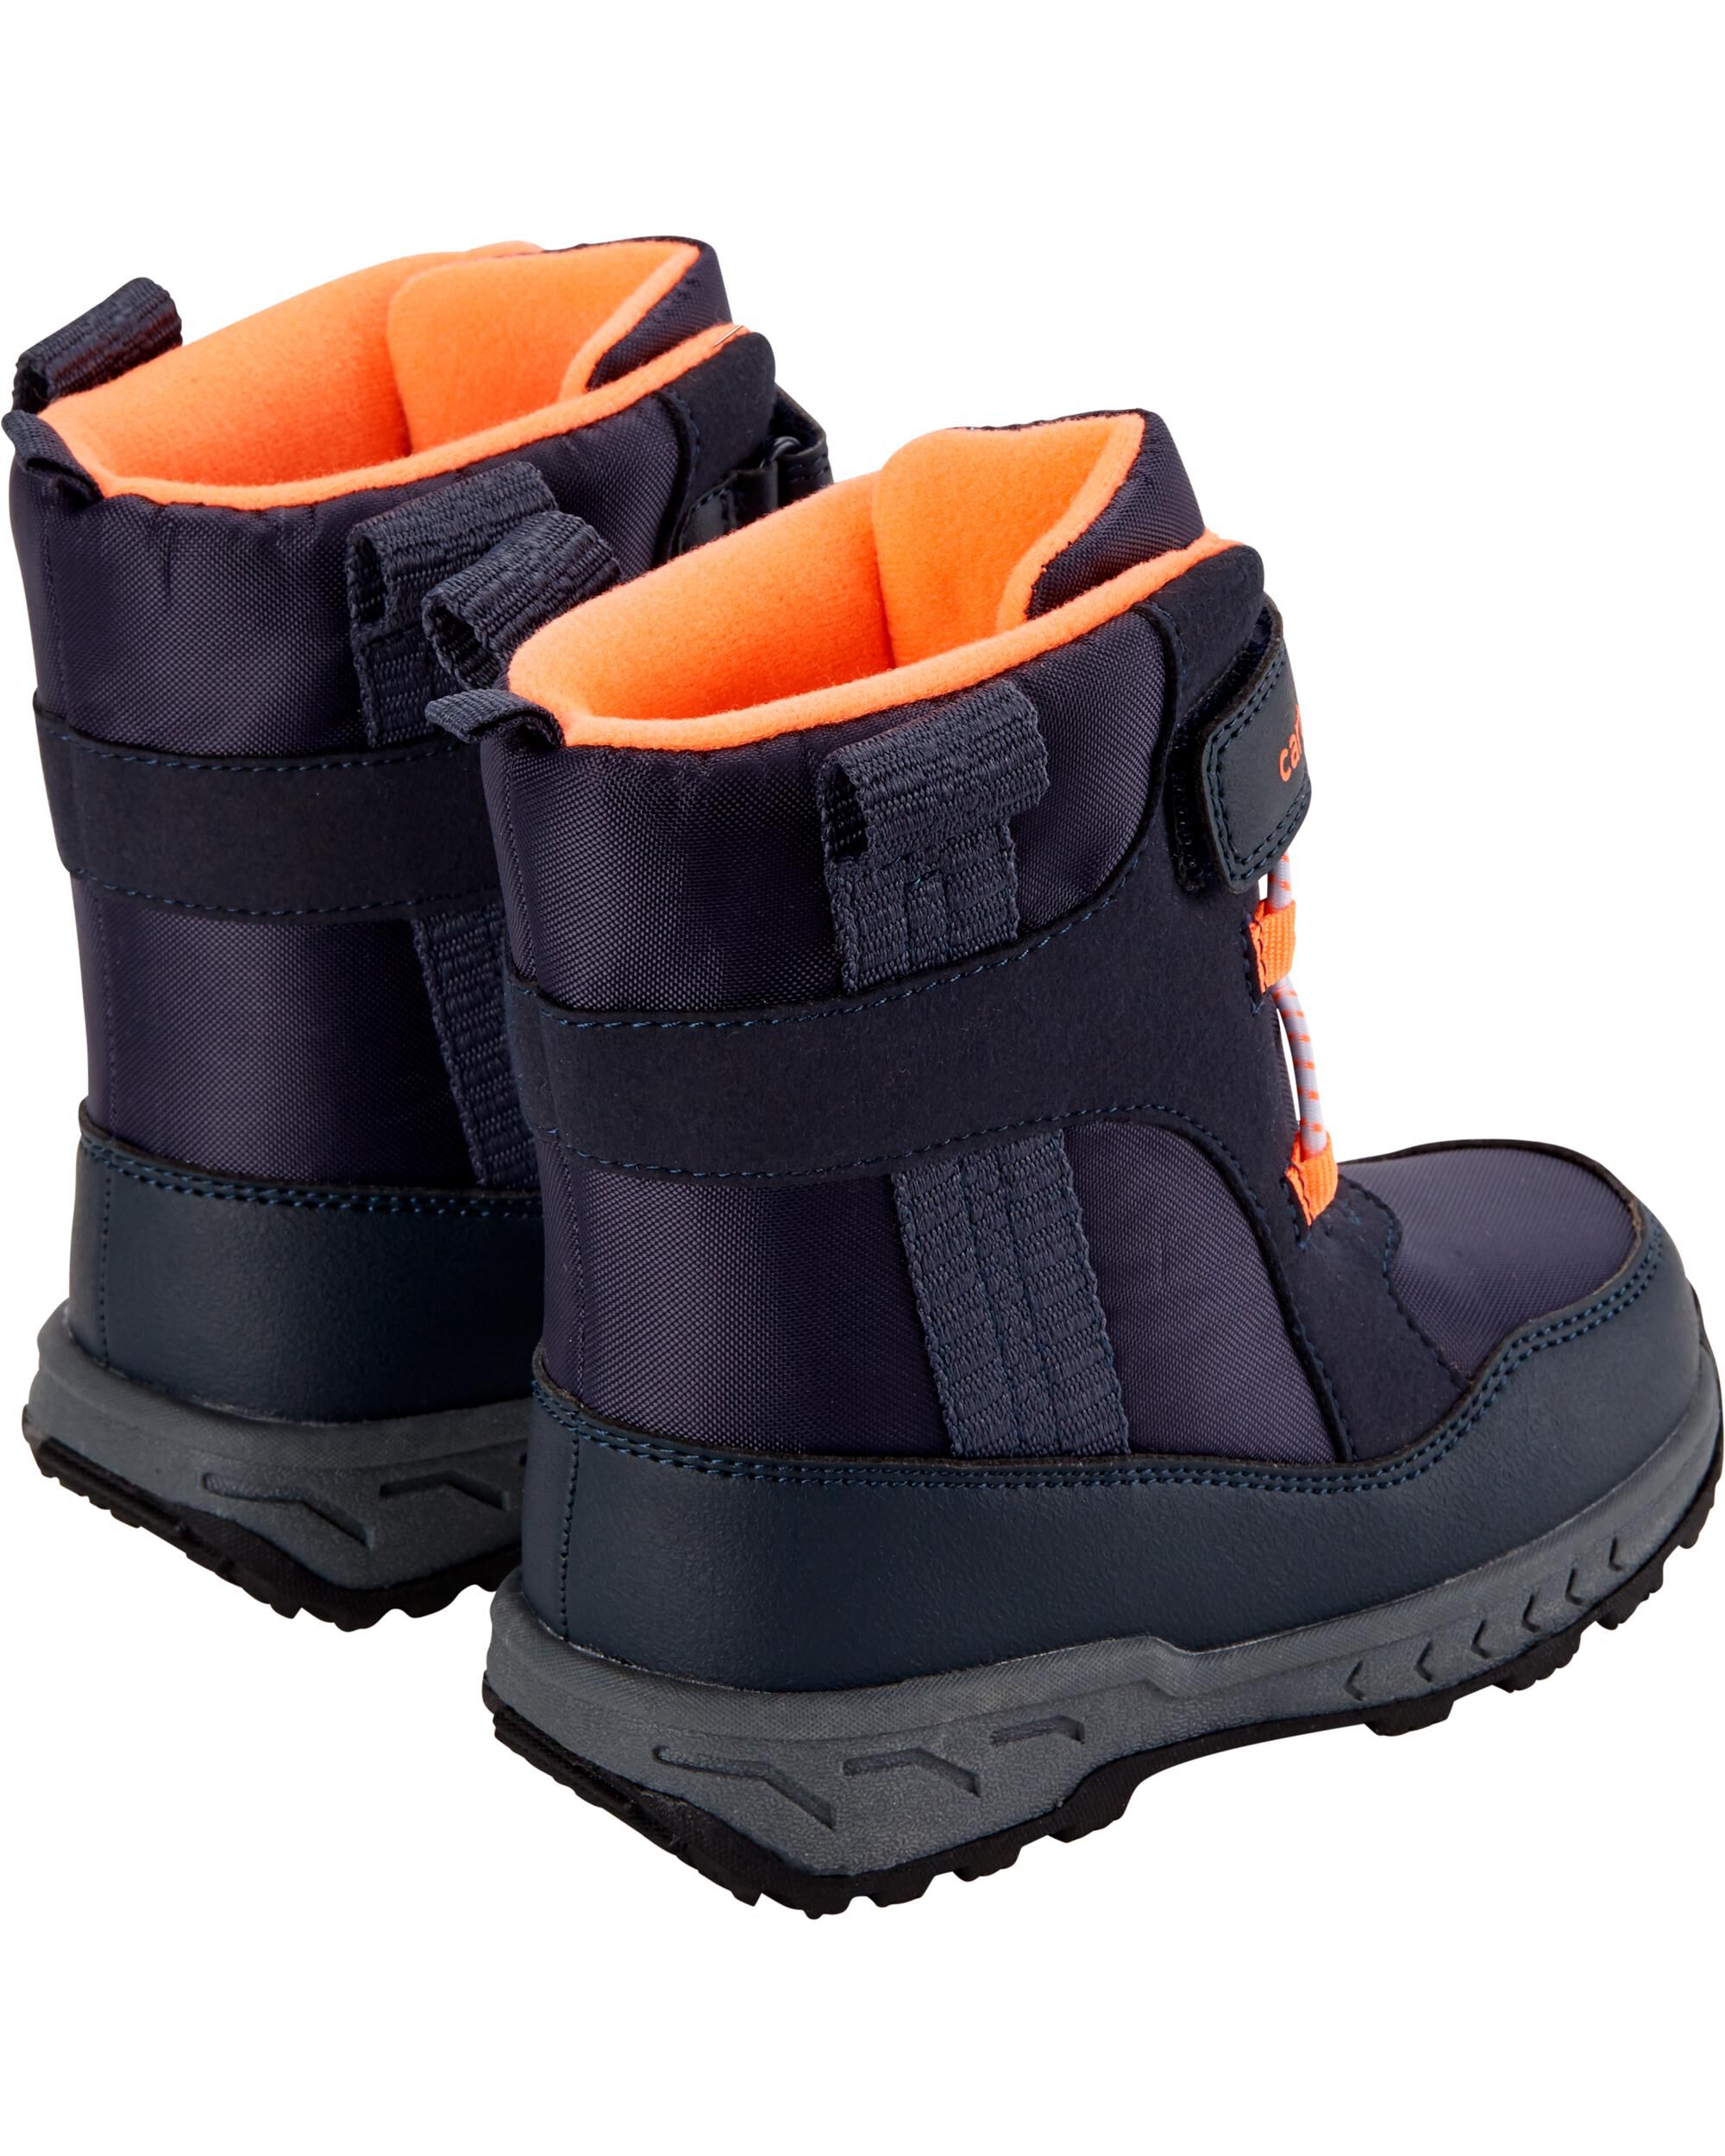 Shoes: Snow Boots Boy | Carter's | Free 